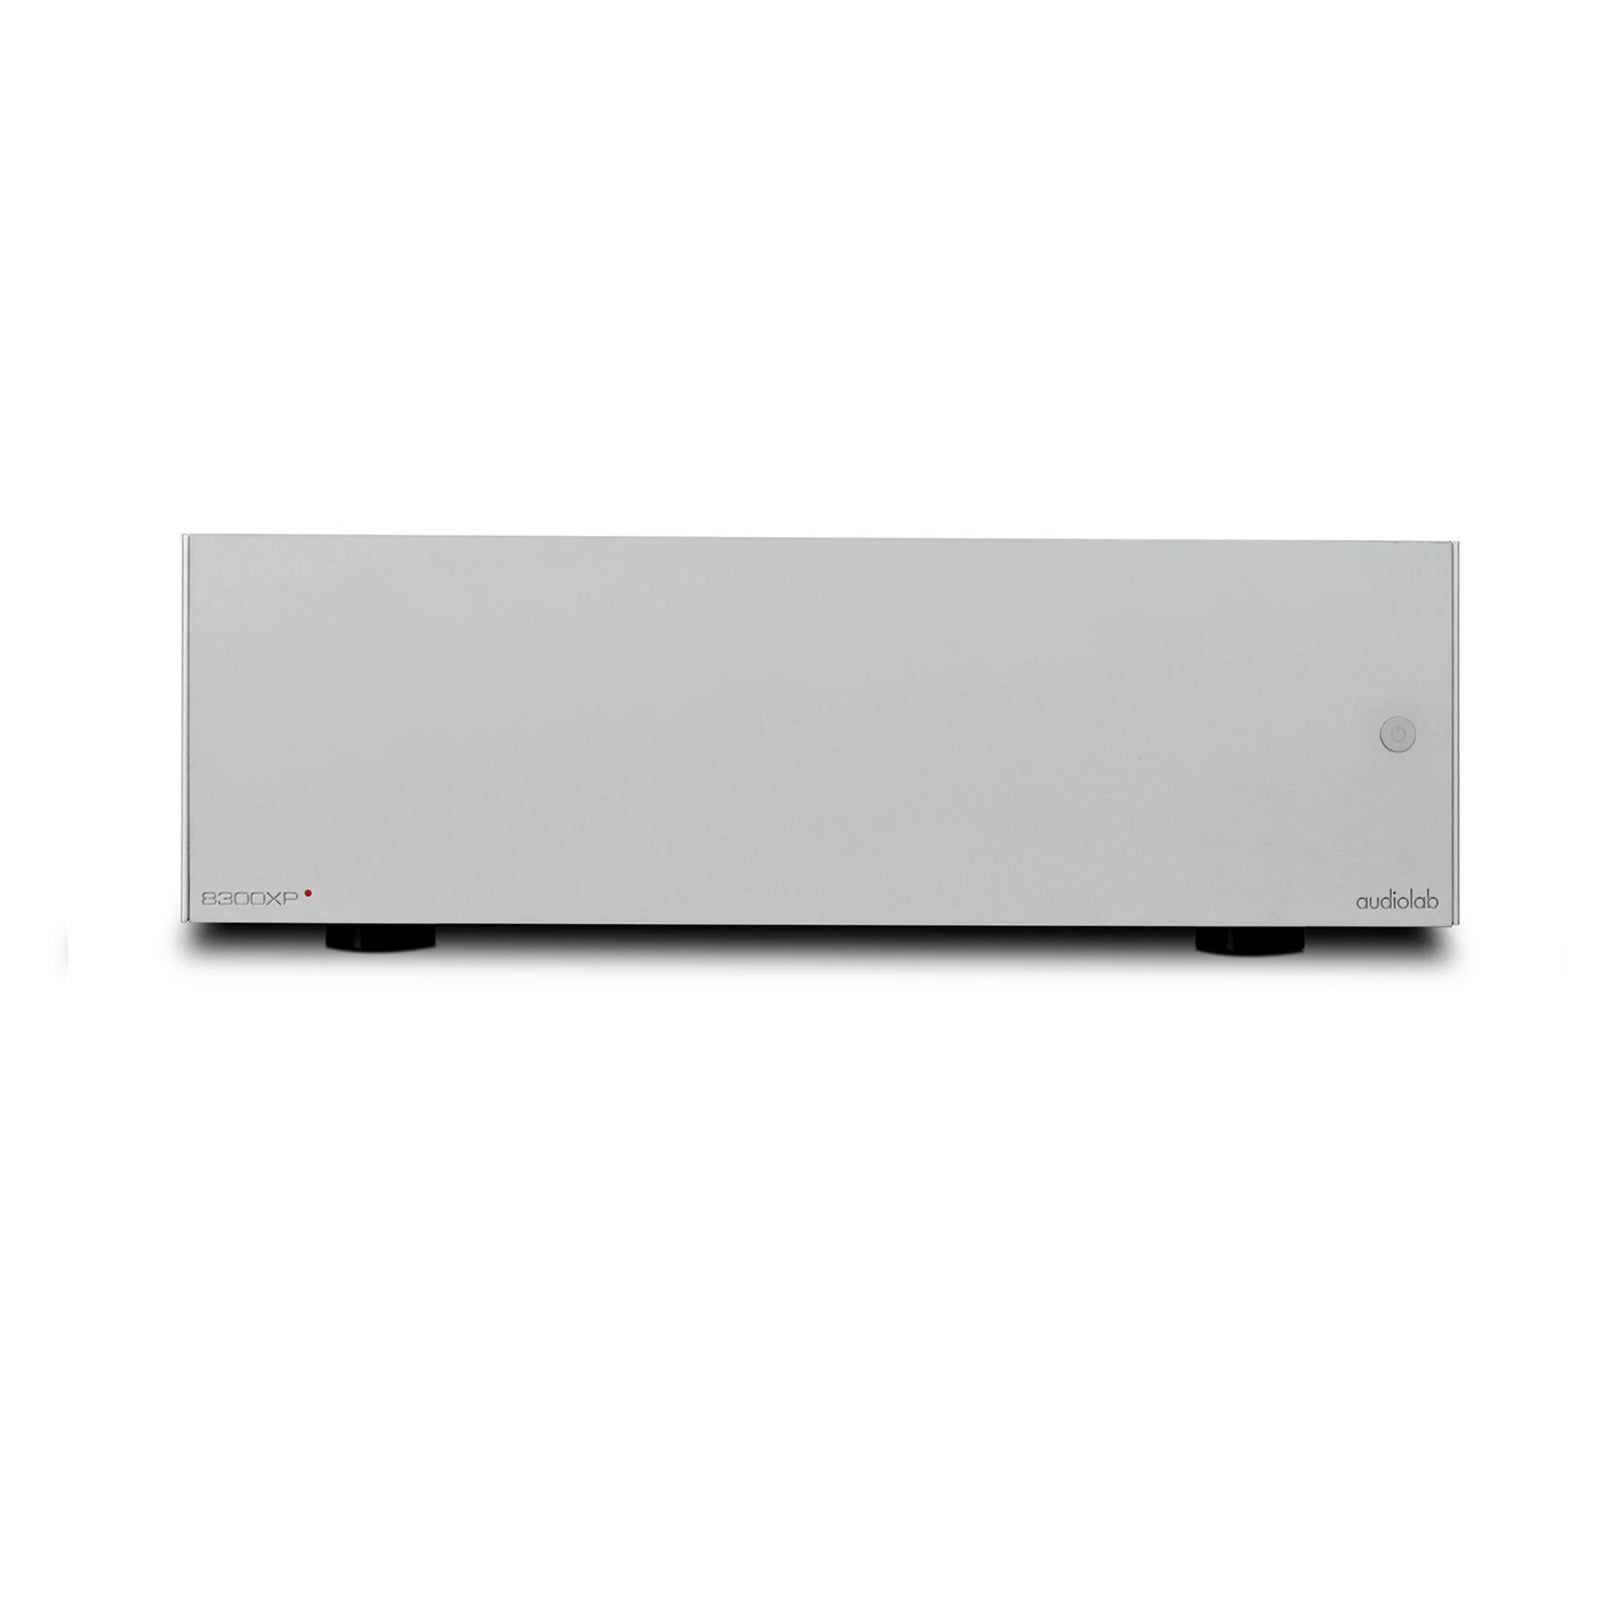 The 8300XP is a classic audiolab stereo power amplifier, with a sound as clean and crisp as its minimalist exterior. Delivering 140W per channel into 8 Ohms, the 8300XP is capable of driving even the toughest of loudspeakers with sure-footed authority, combining audiolab’s class-leading neutrality with an unerring ability to engage the listener throughout a musical performance.